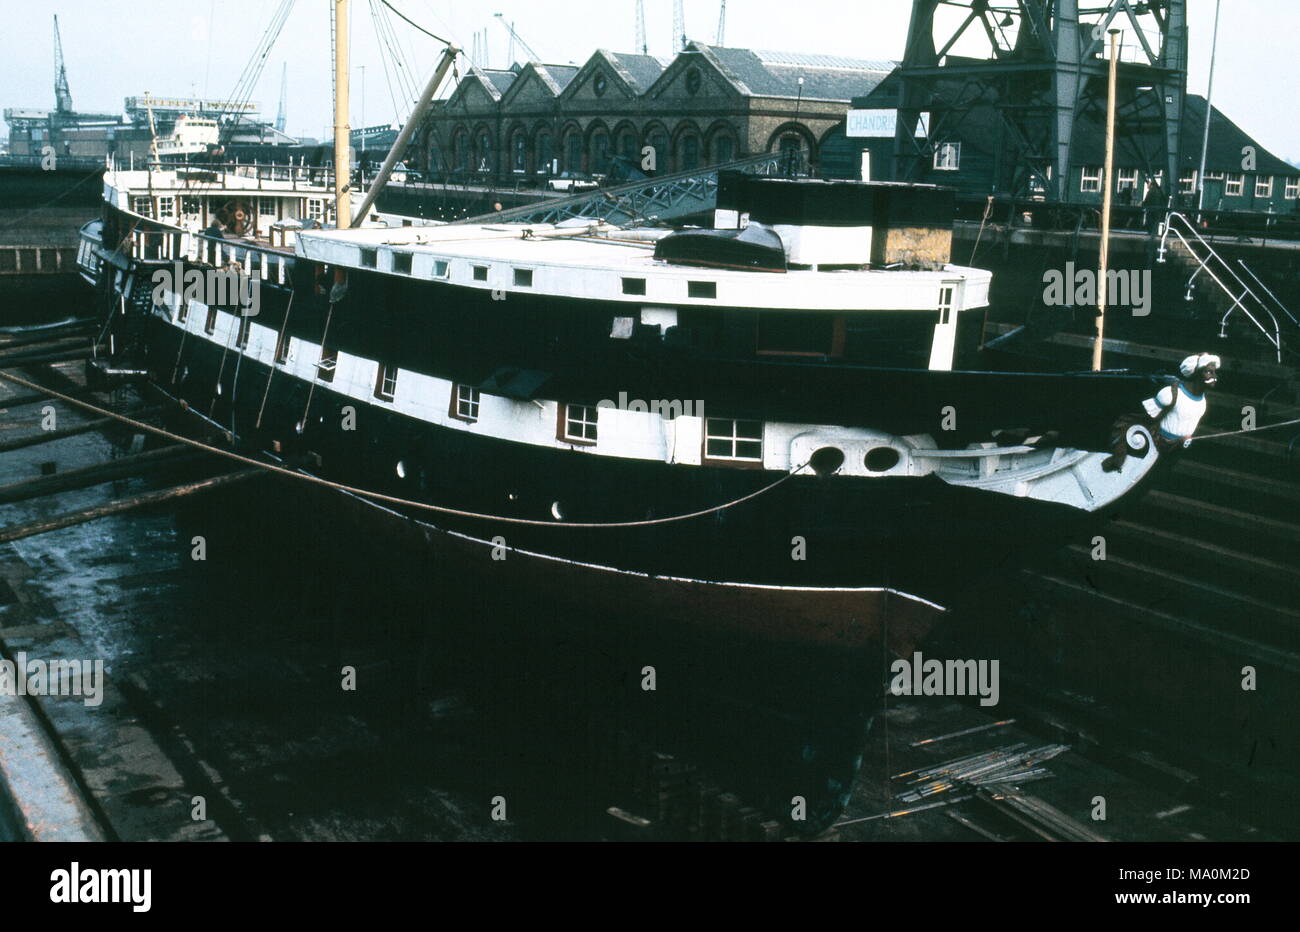 AJAXNETPHOTO. - 16TH FEBRUARY, 1972. SOUTHAMPTON, ENGLAND. - WOODEN WALL REFIT -  T.S. FOUDROYANT (EX TRINCOMALEE) UNDERGOING REPAIRS IN NR. 5 DRY DOCK.  PHOTO:JONATHAN EASTLAND/AJAX REF:357205 3 Stock Photo